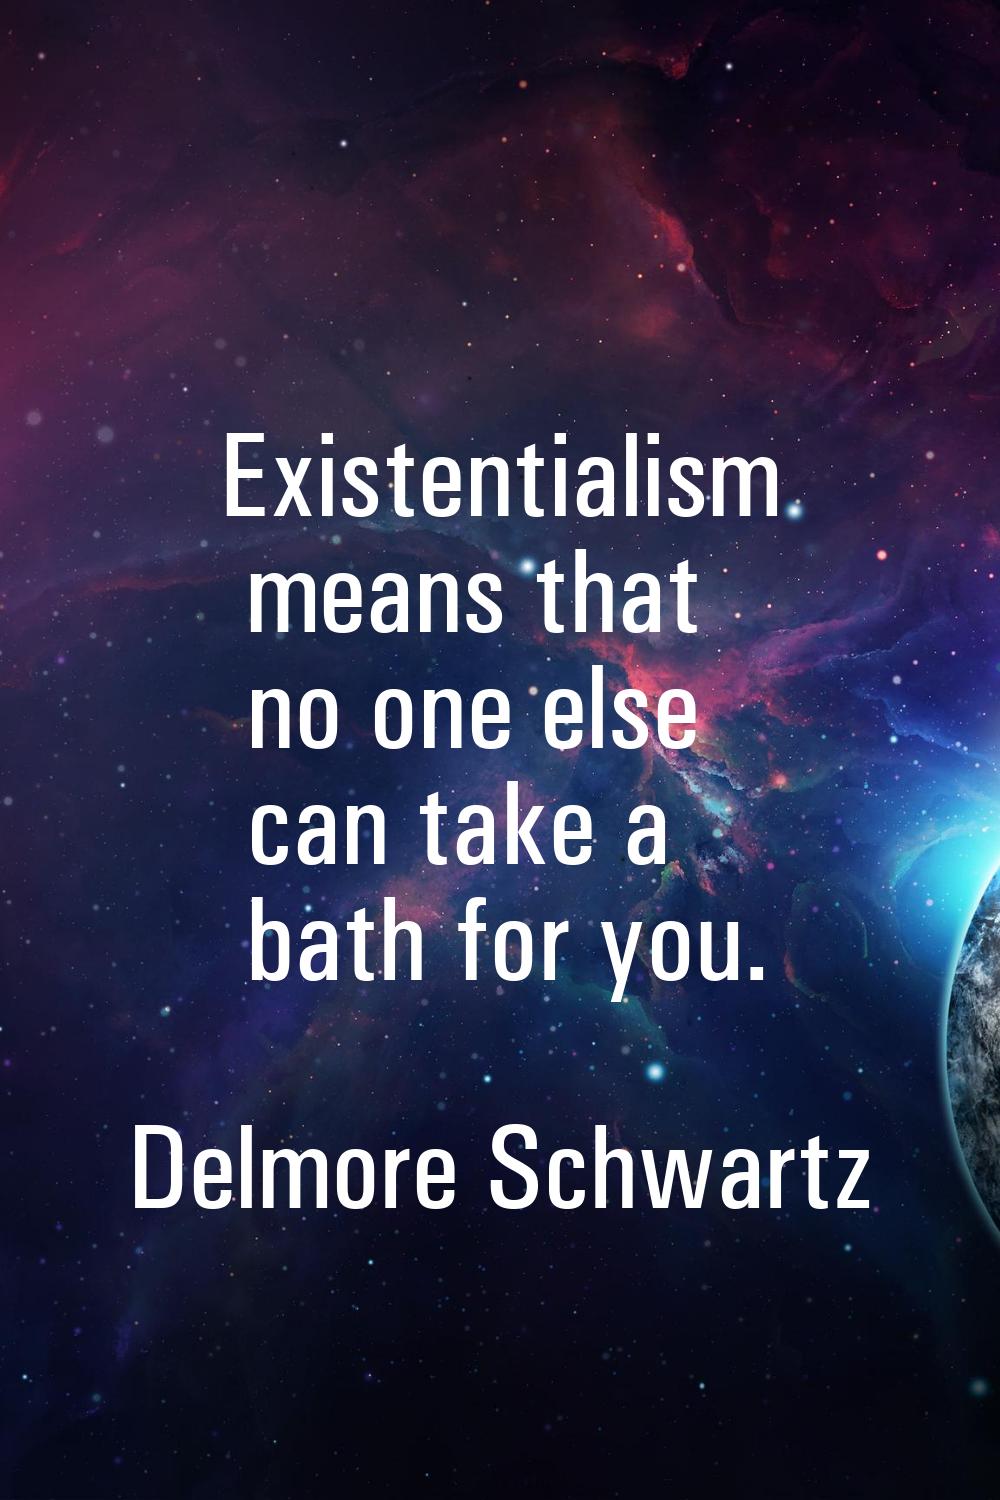 Existentialism means that no one else can take a bath for you.